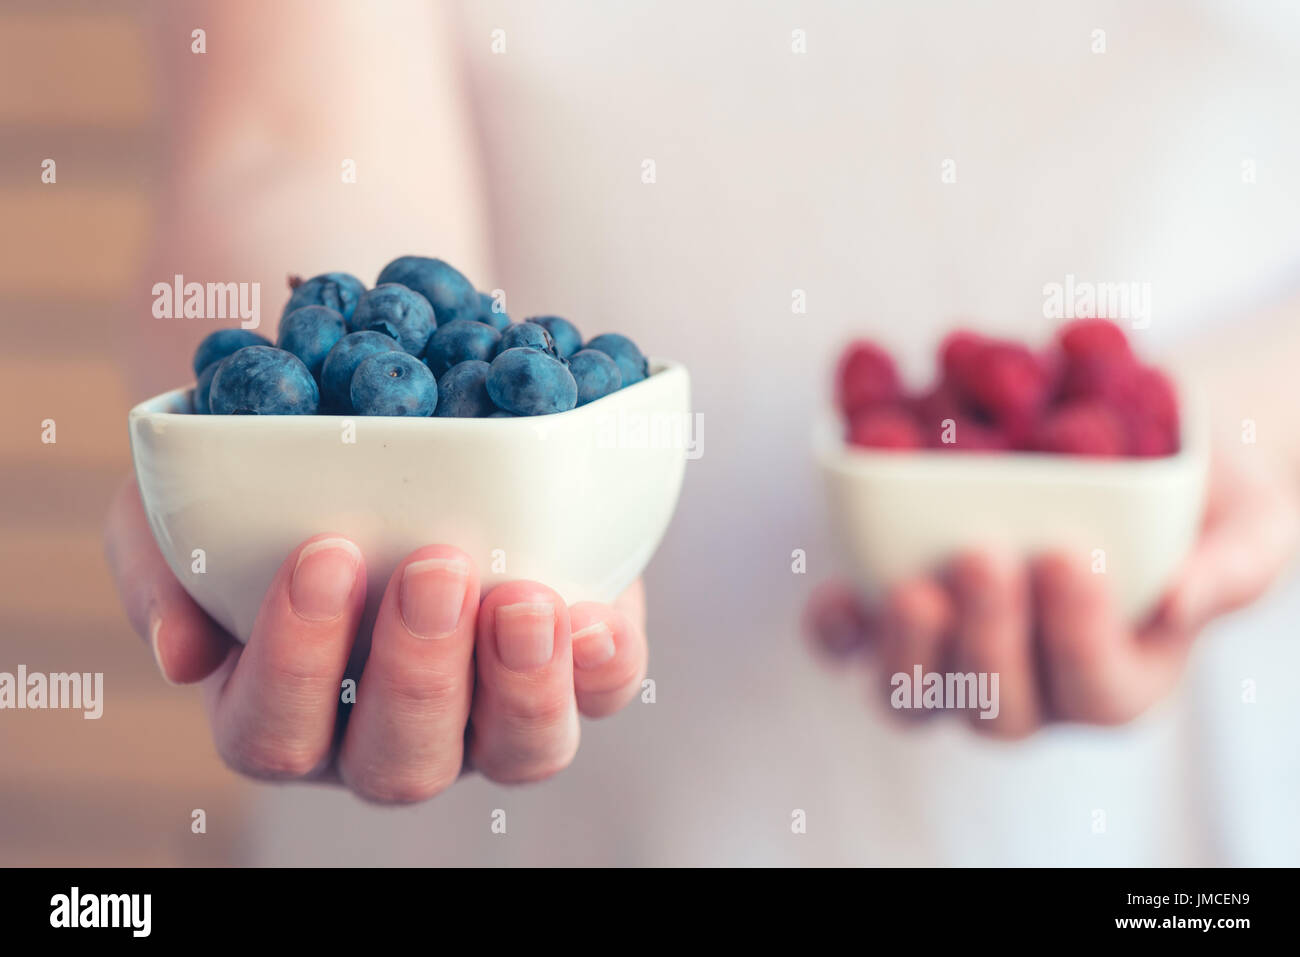 Choose blueberries over raspberries, female hands with berry fruit, selective focus Stock Photo